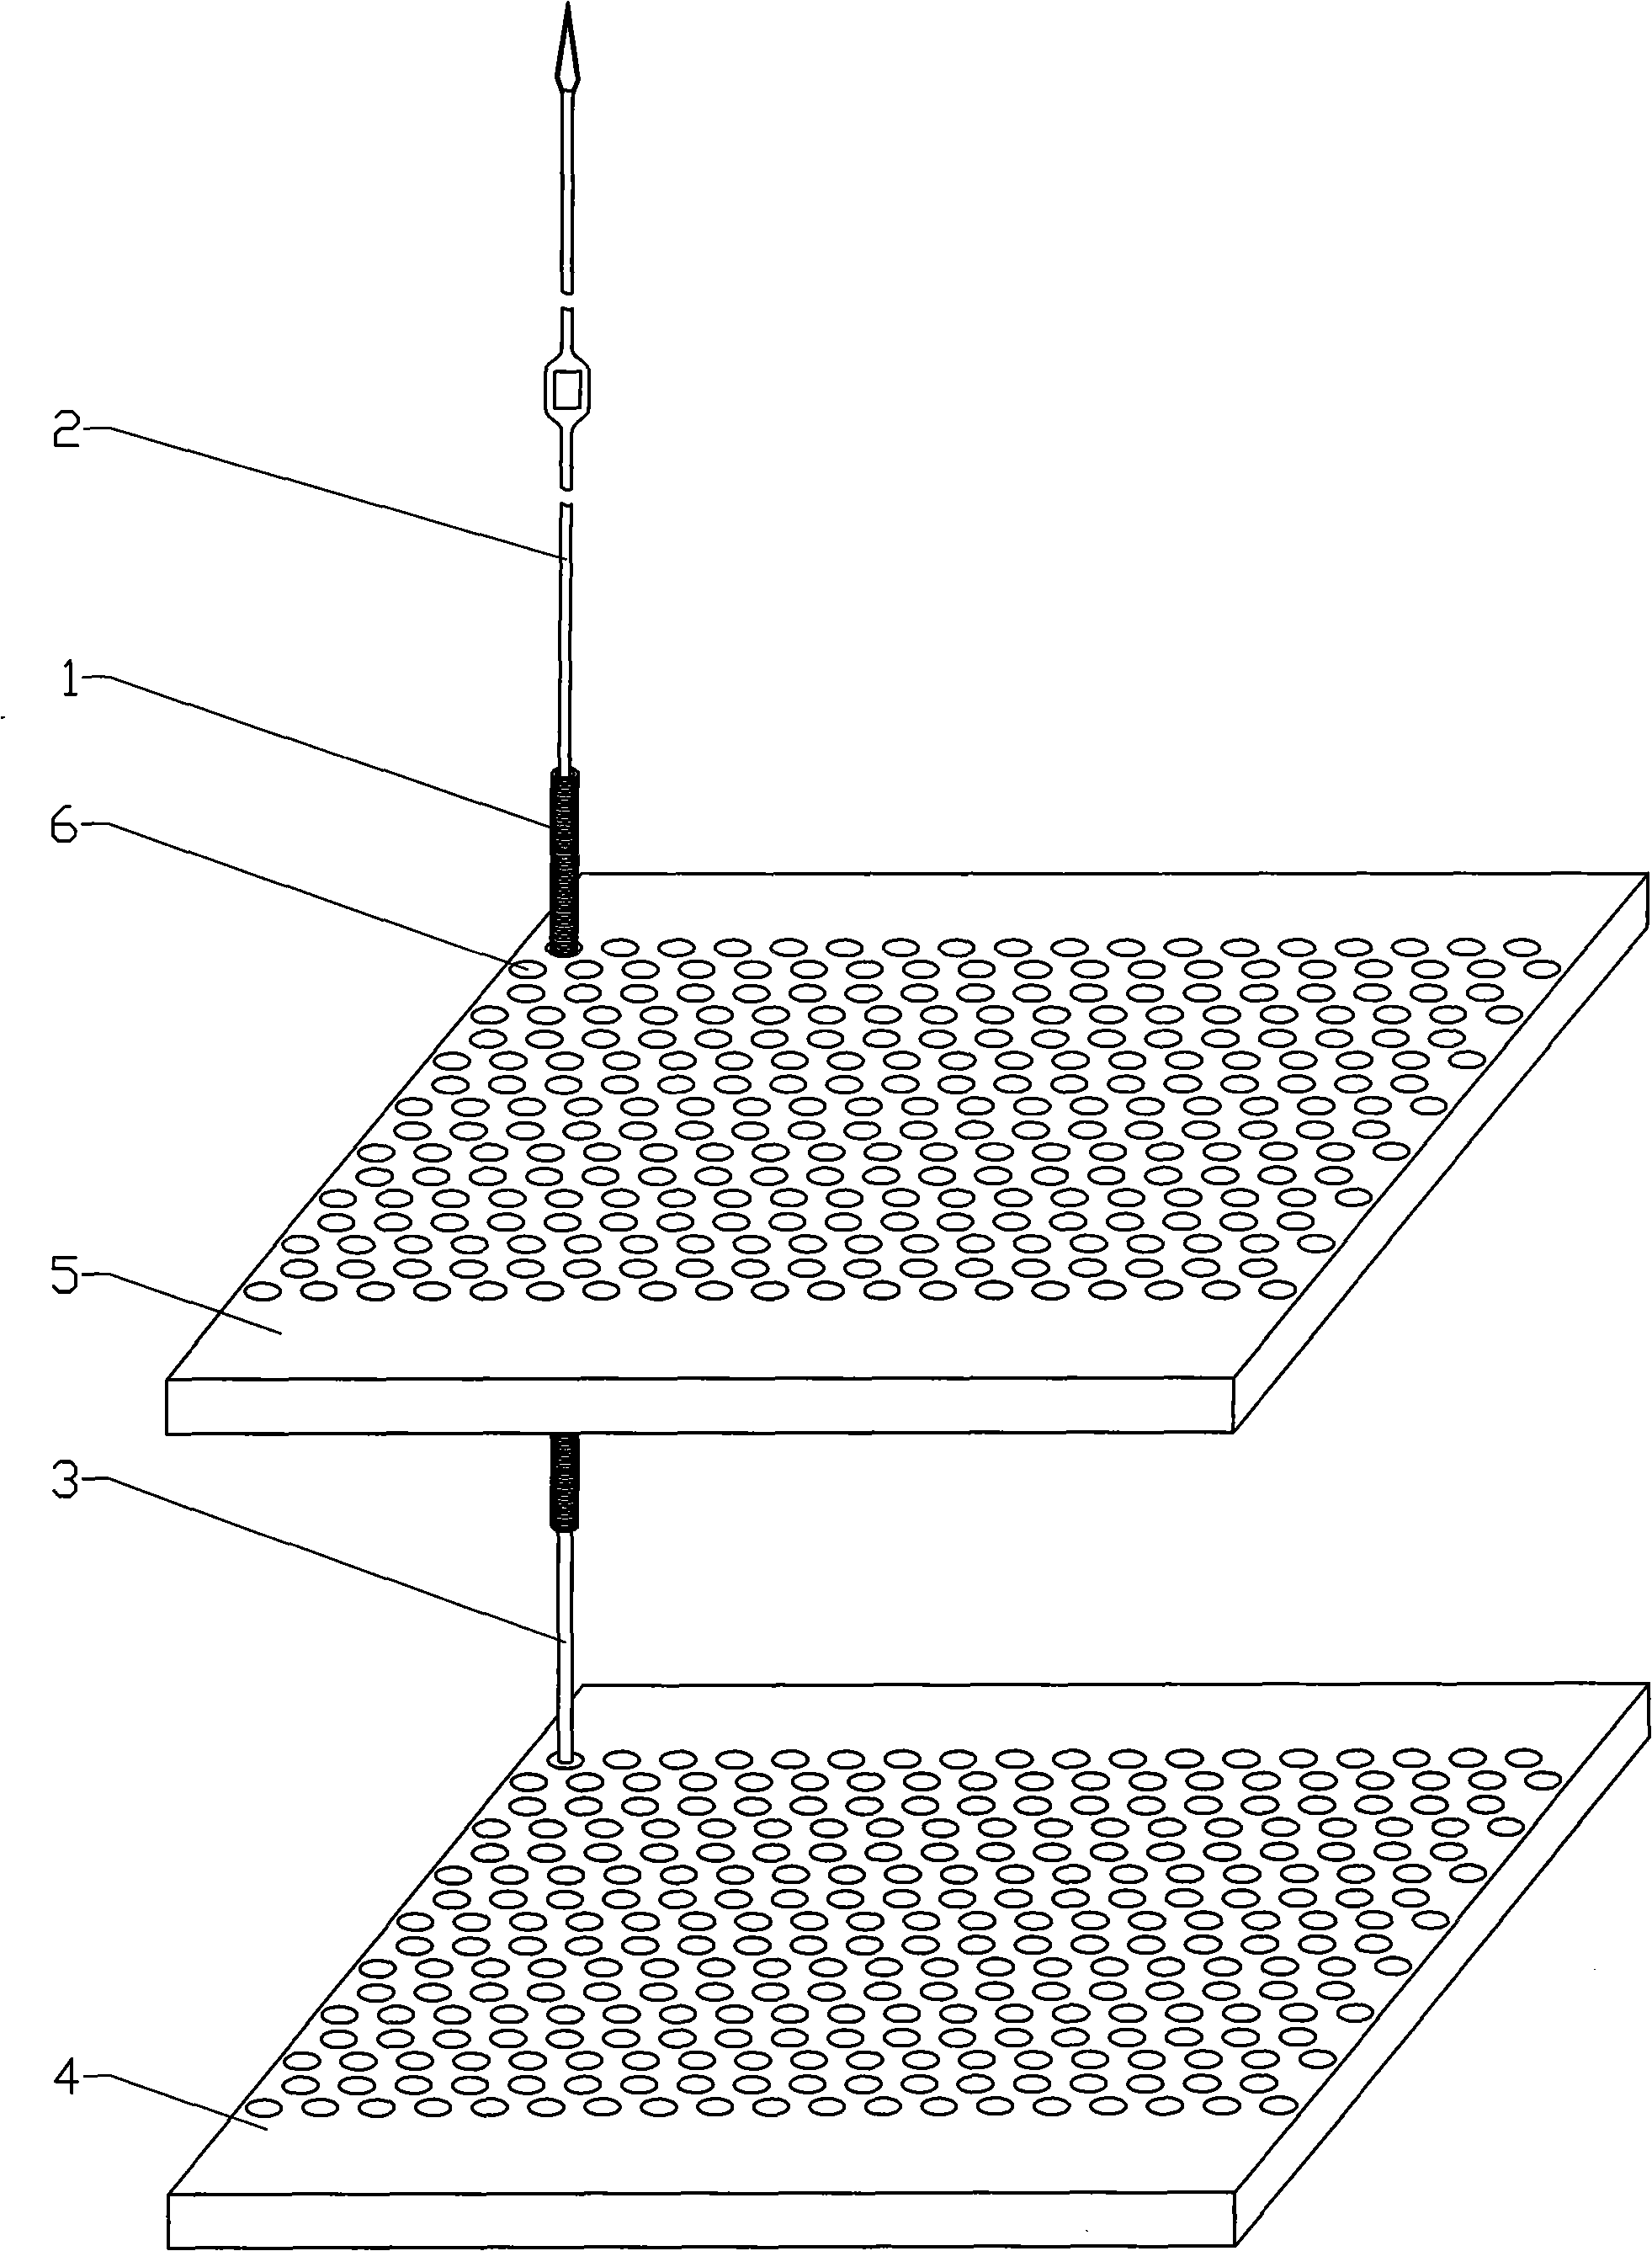 Spring mechanism harness structure for water jet loom